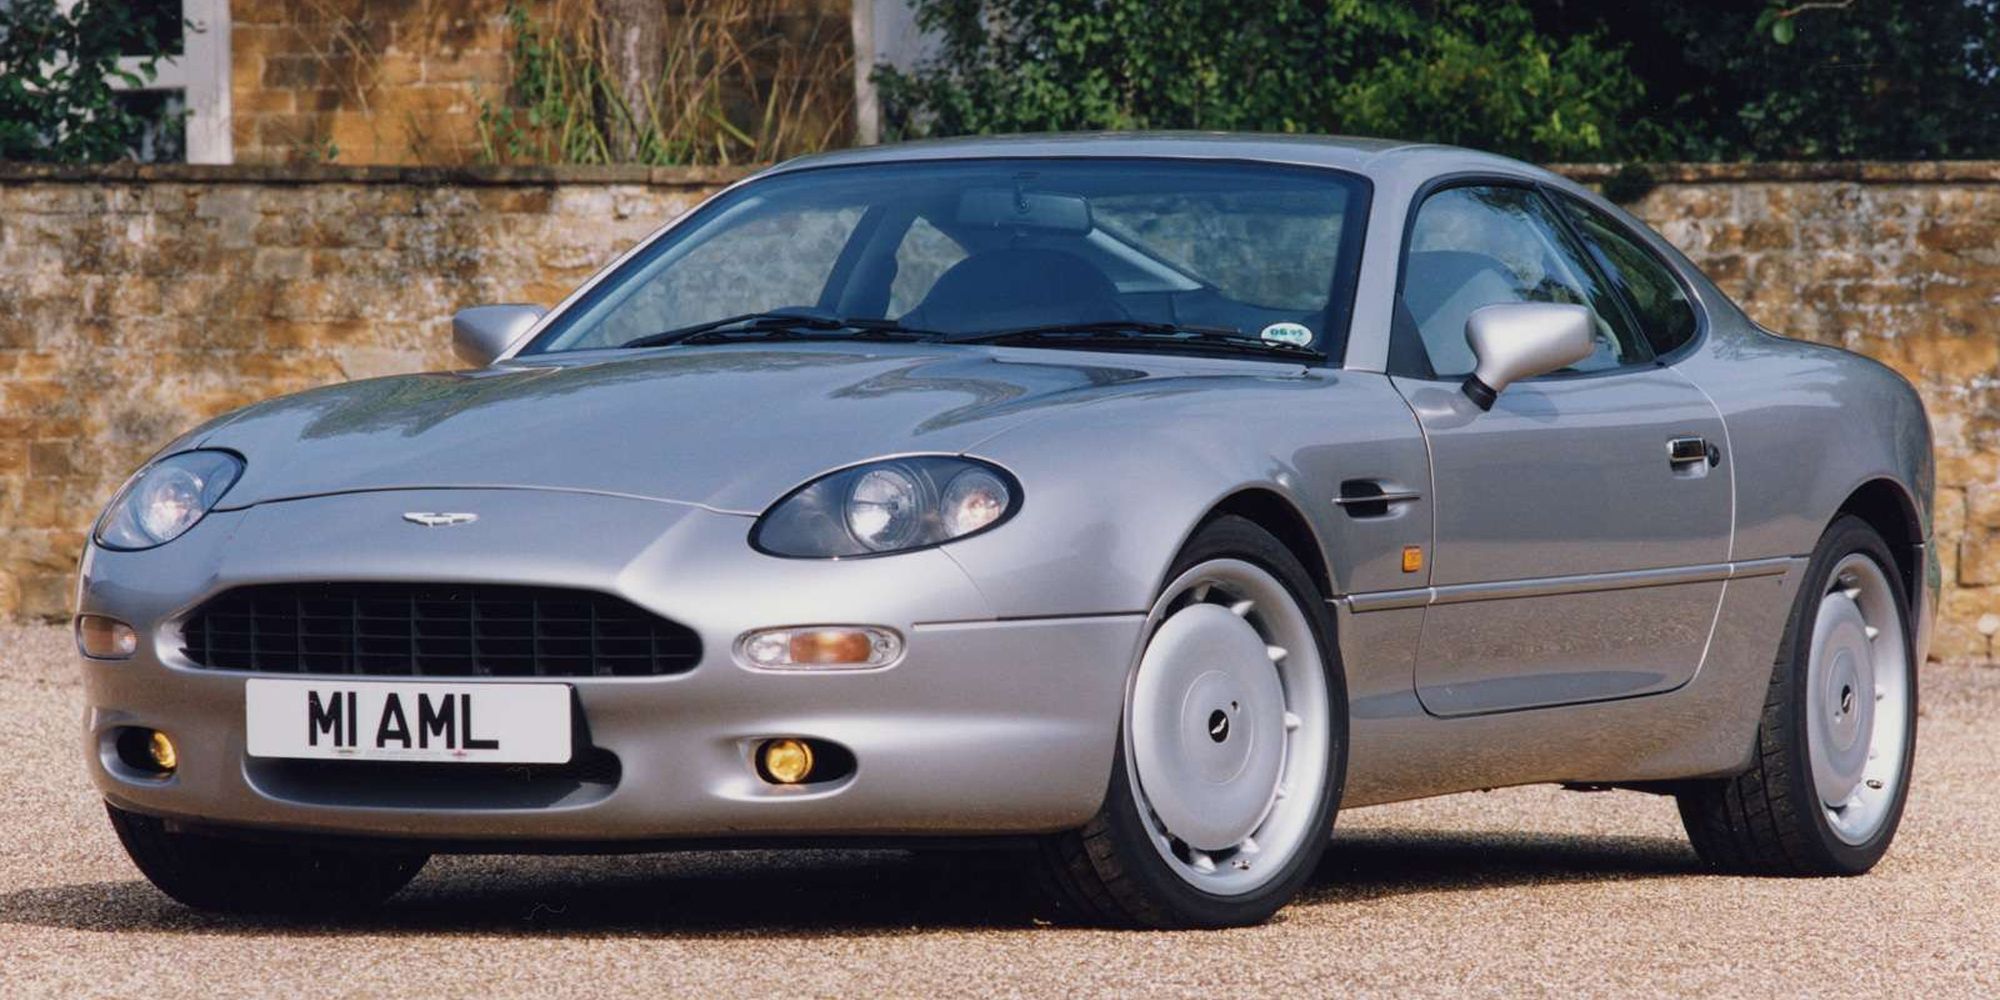 Front 3/4 view of a silver DB7